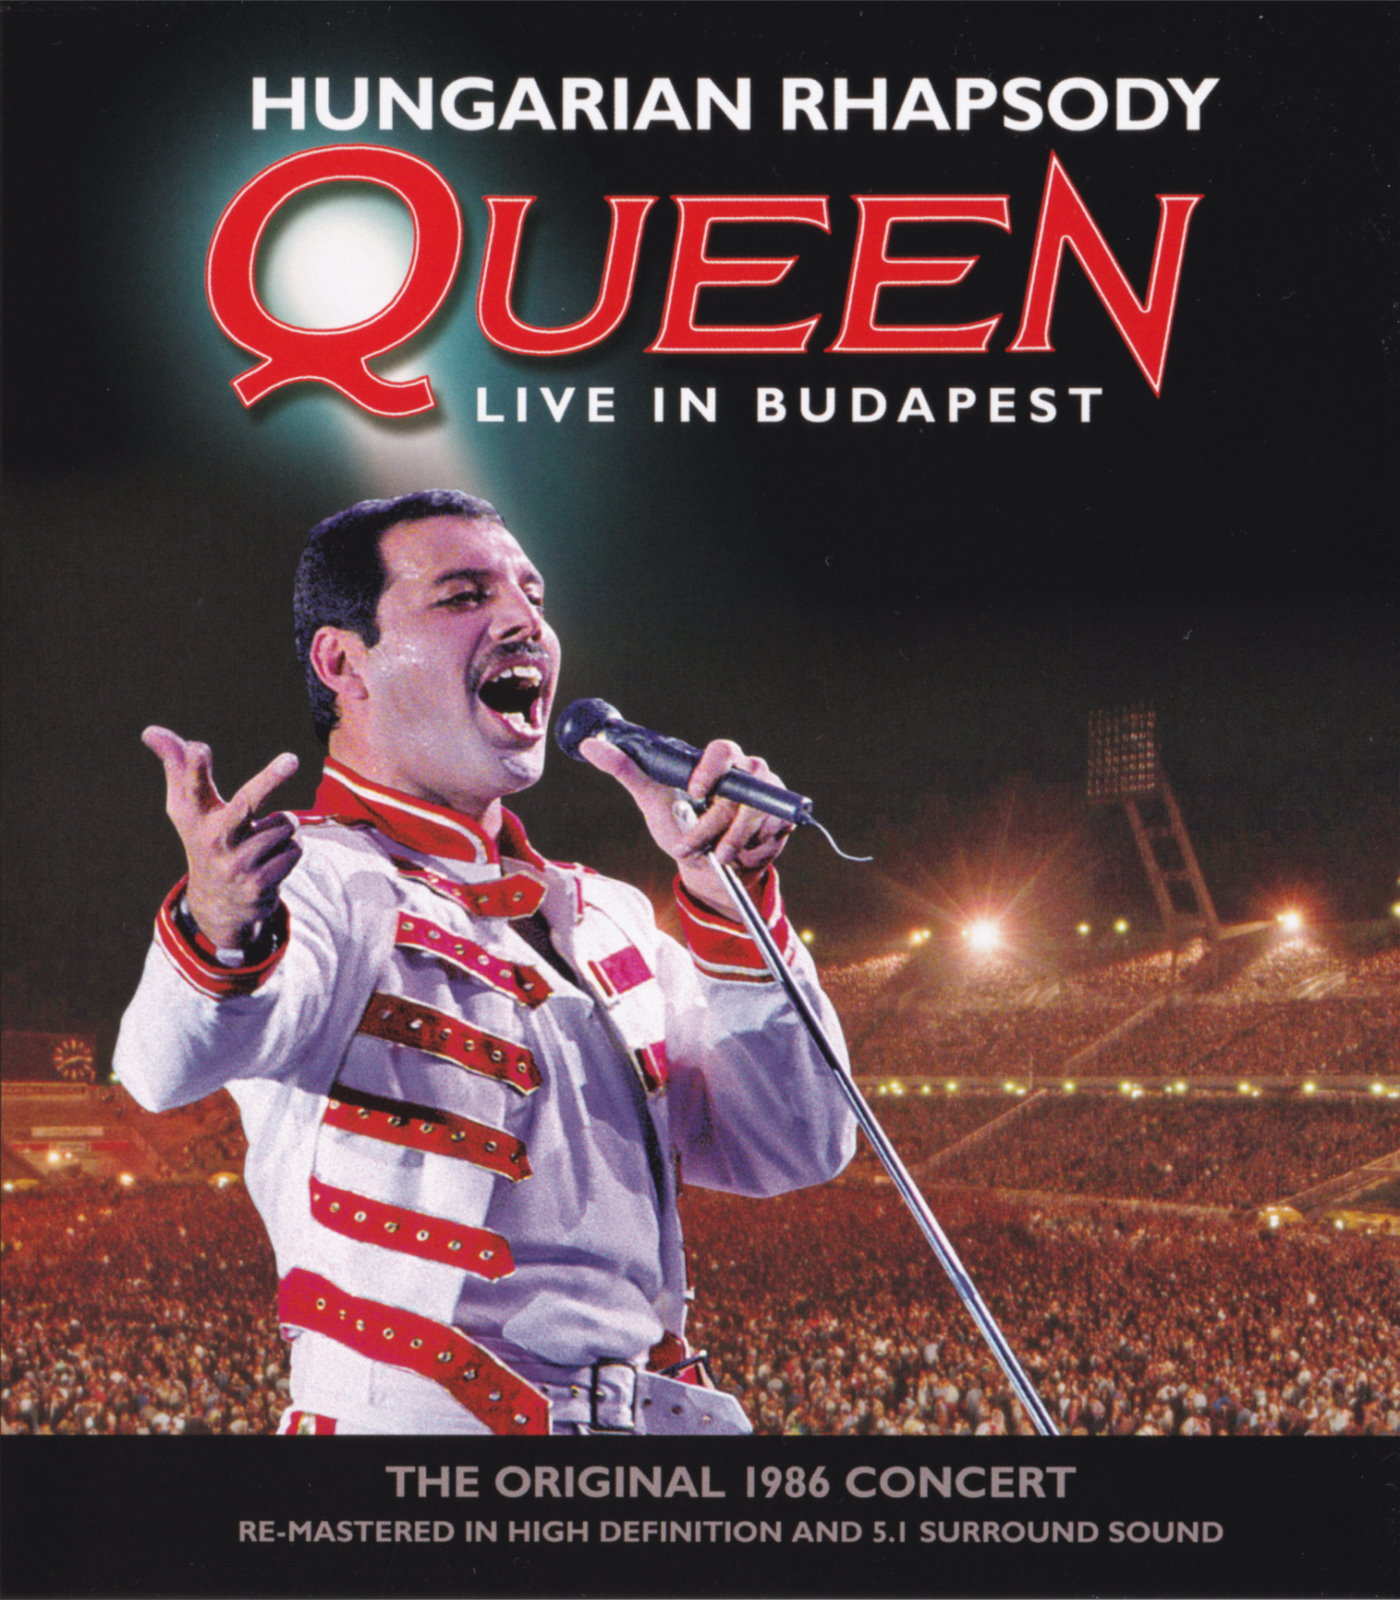 Cover - Hungarian Rhapsody - Queen Live in Budapes.jpg